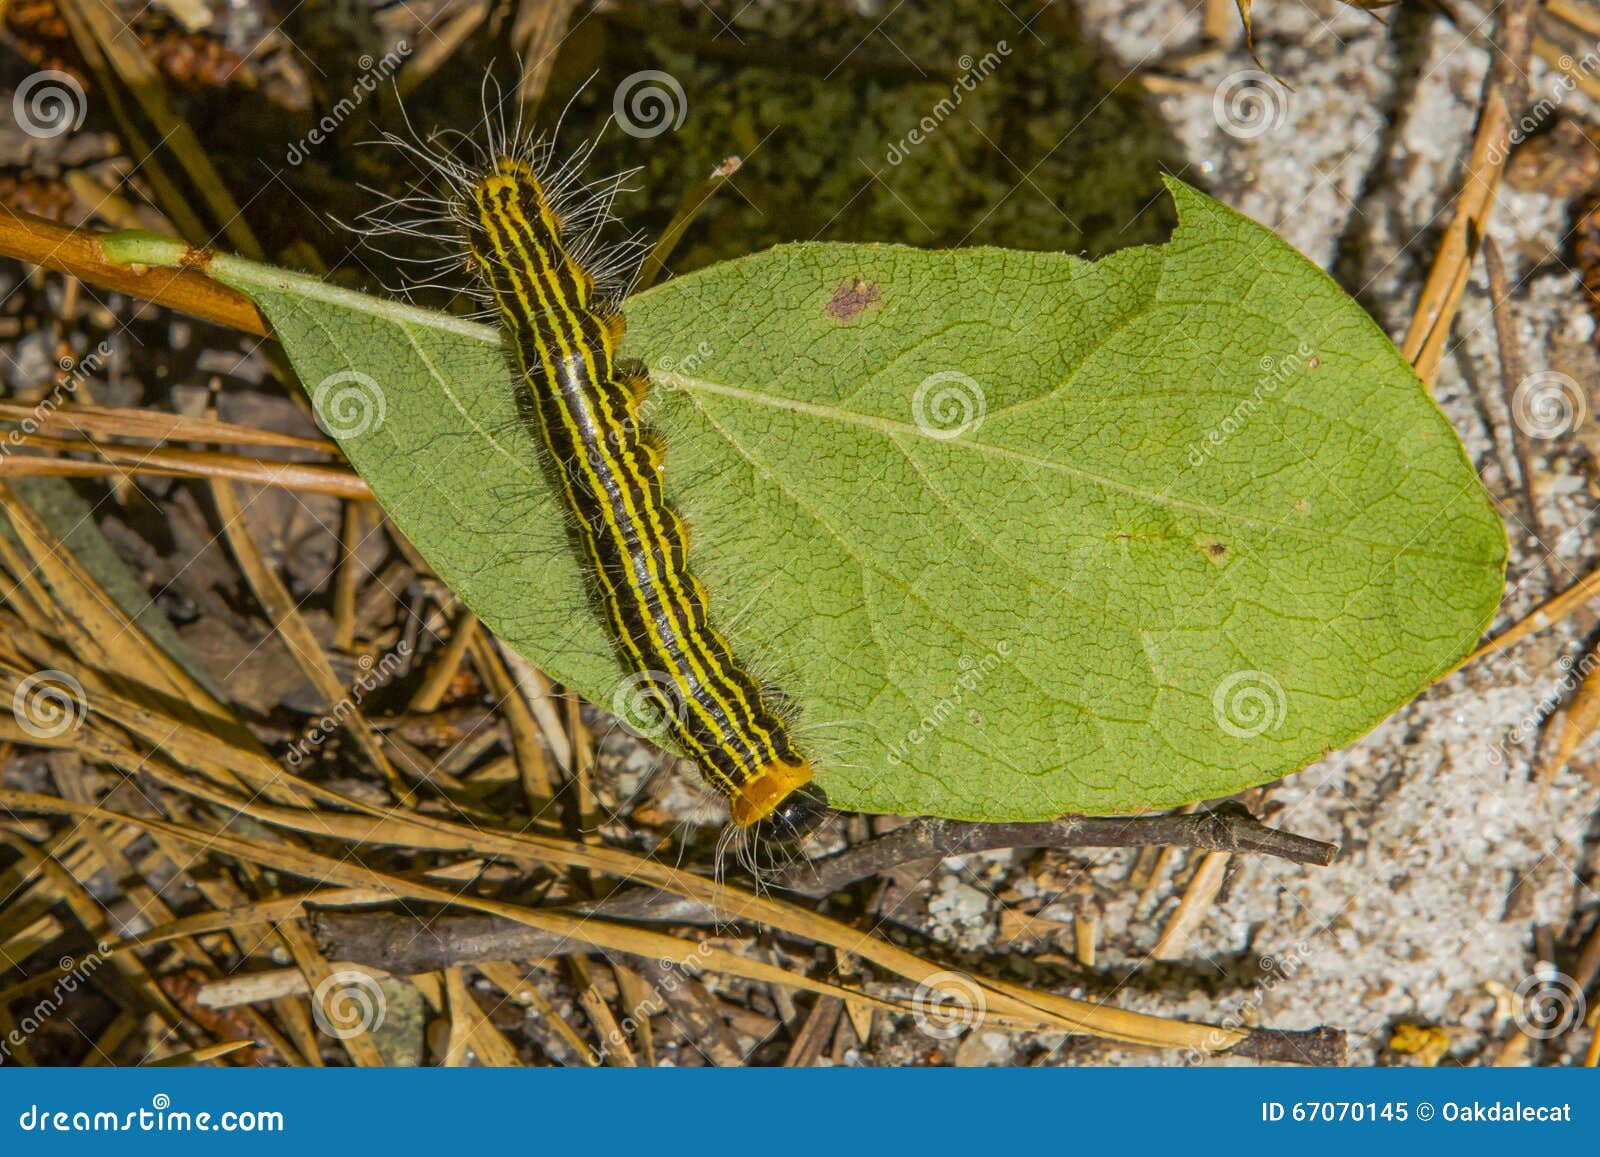 Black And Yellow Striped Caterpillar Stock Image Image Of